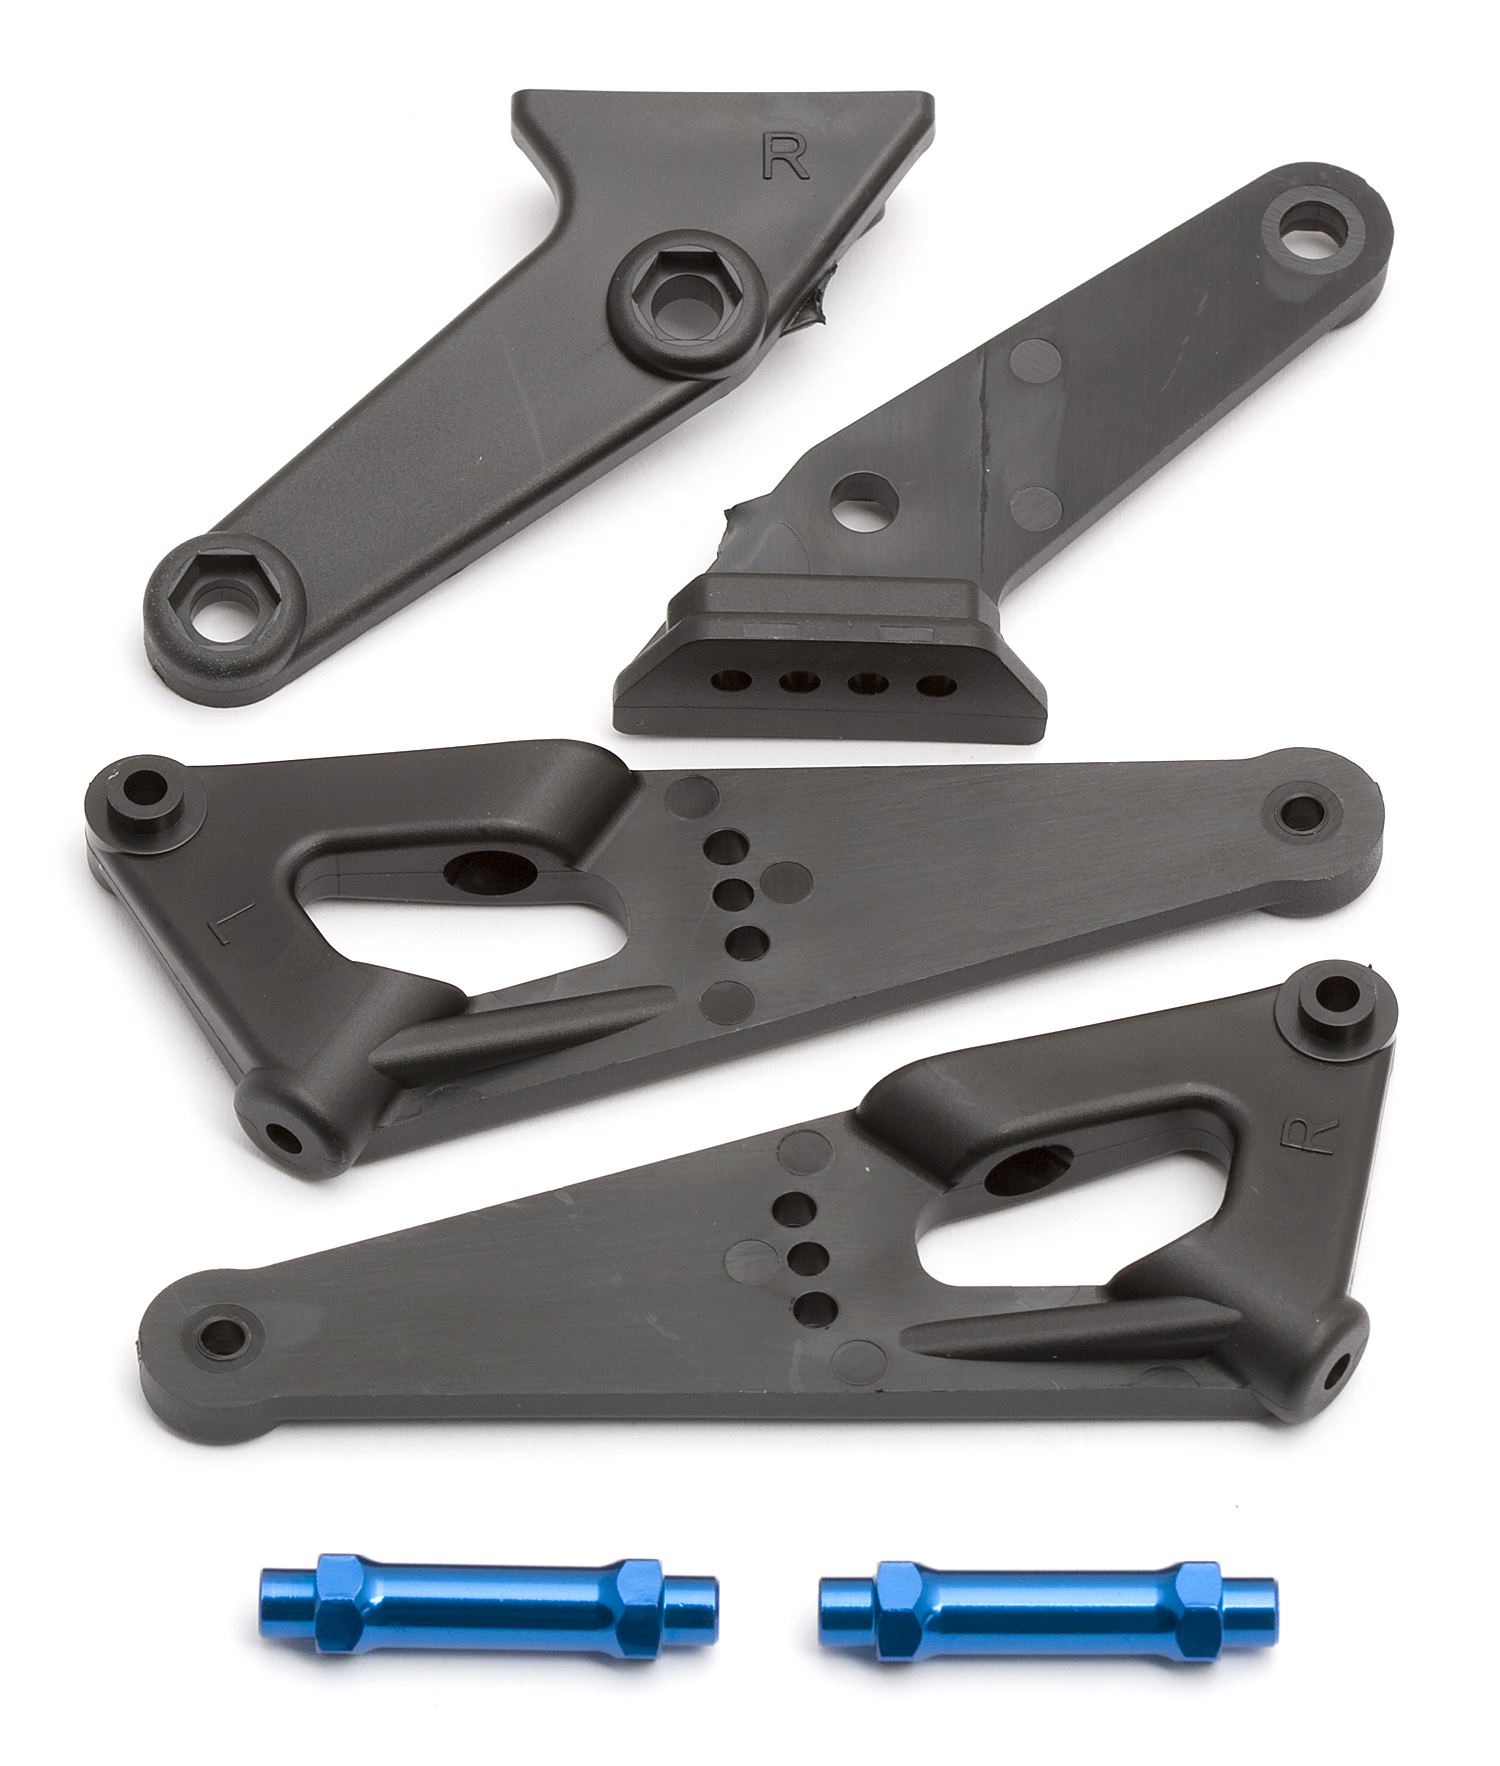 Associated items. Mount Wing. Angle Tools for Wing RC. Rc17826. RC plane Exhaust Mount.